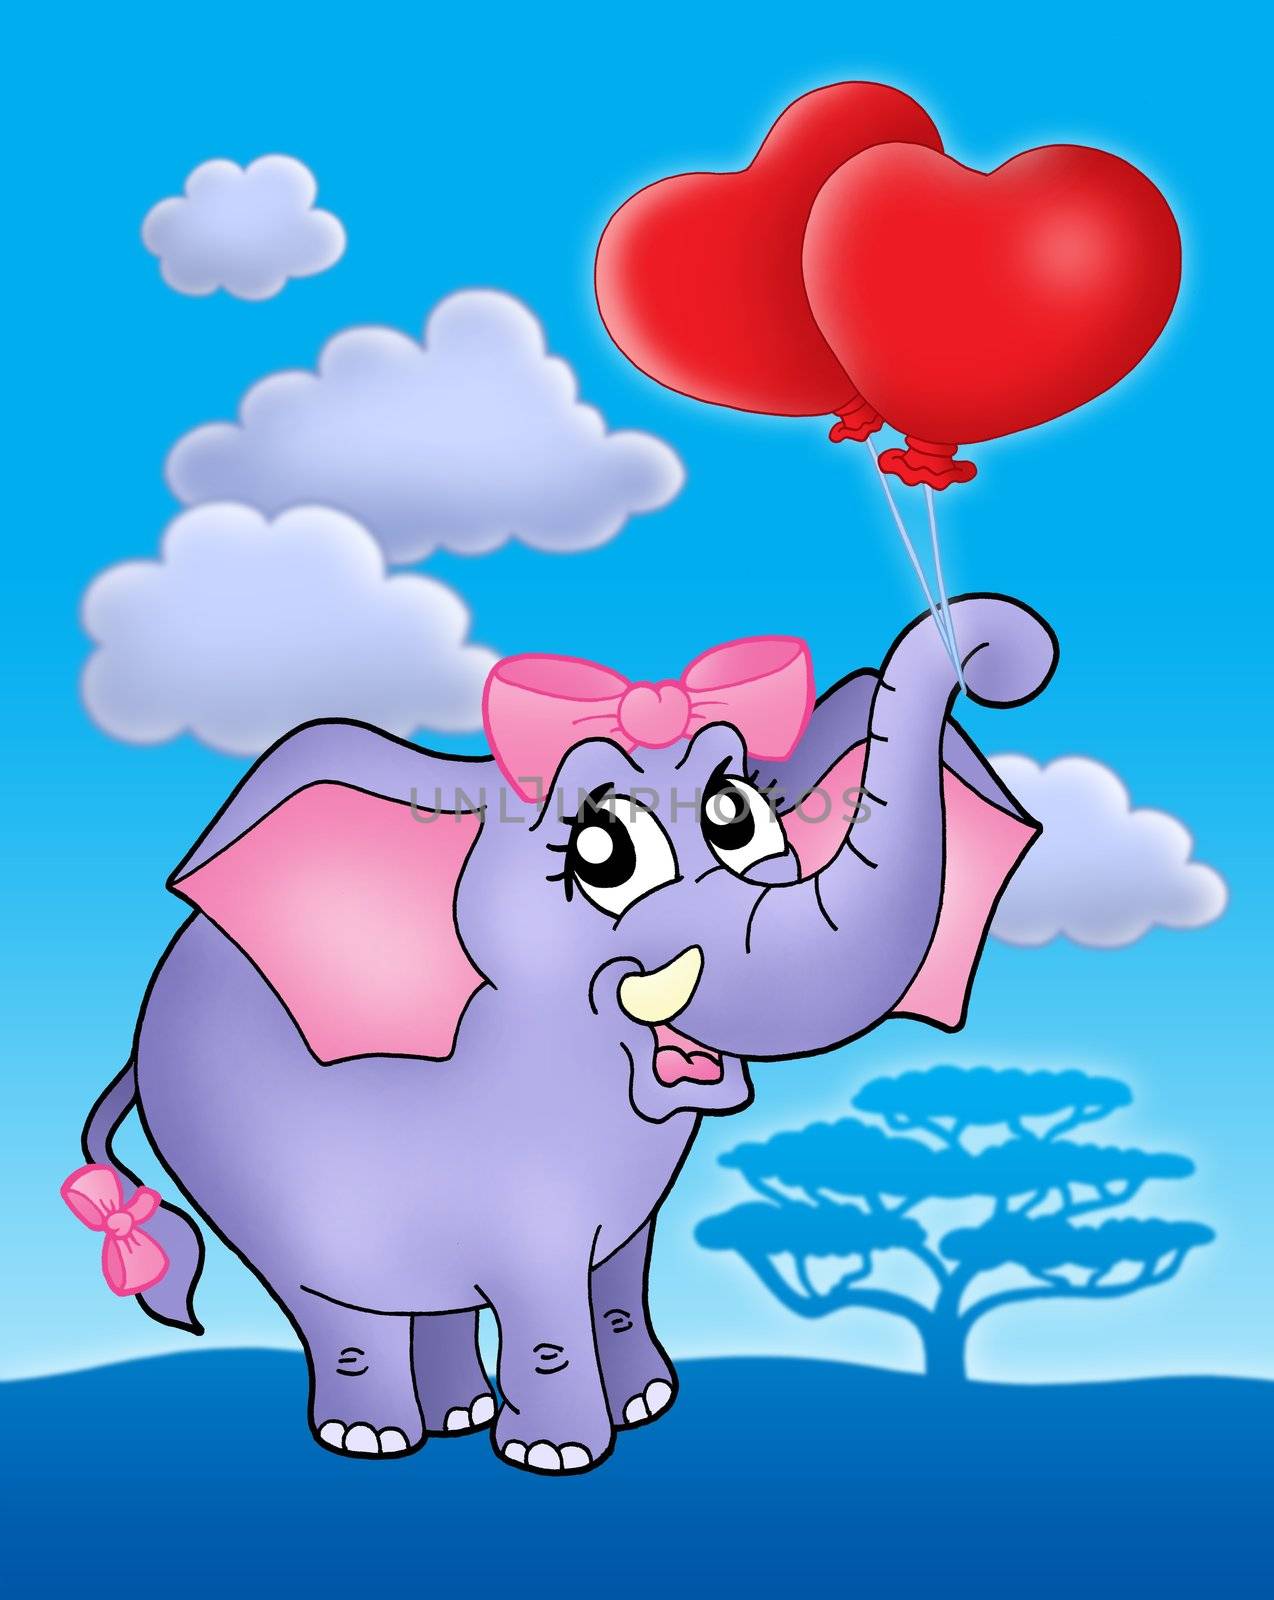 Color illustration of elephant girl with heart balloons on blue sky.